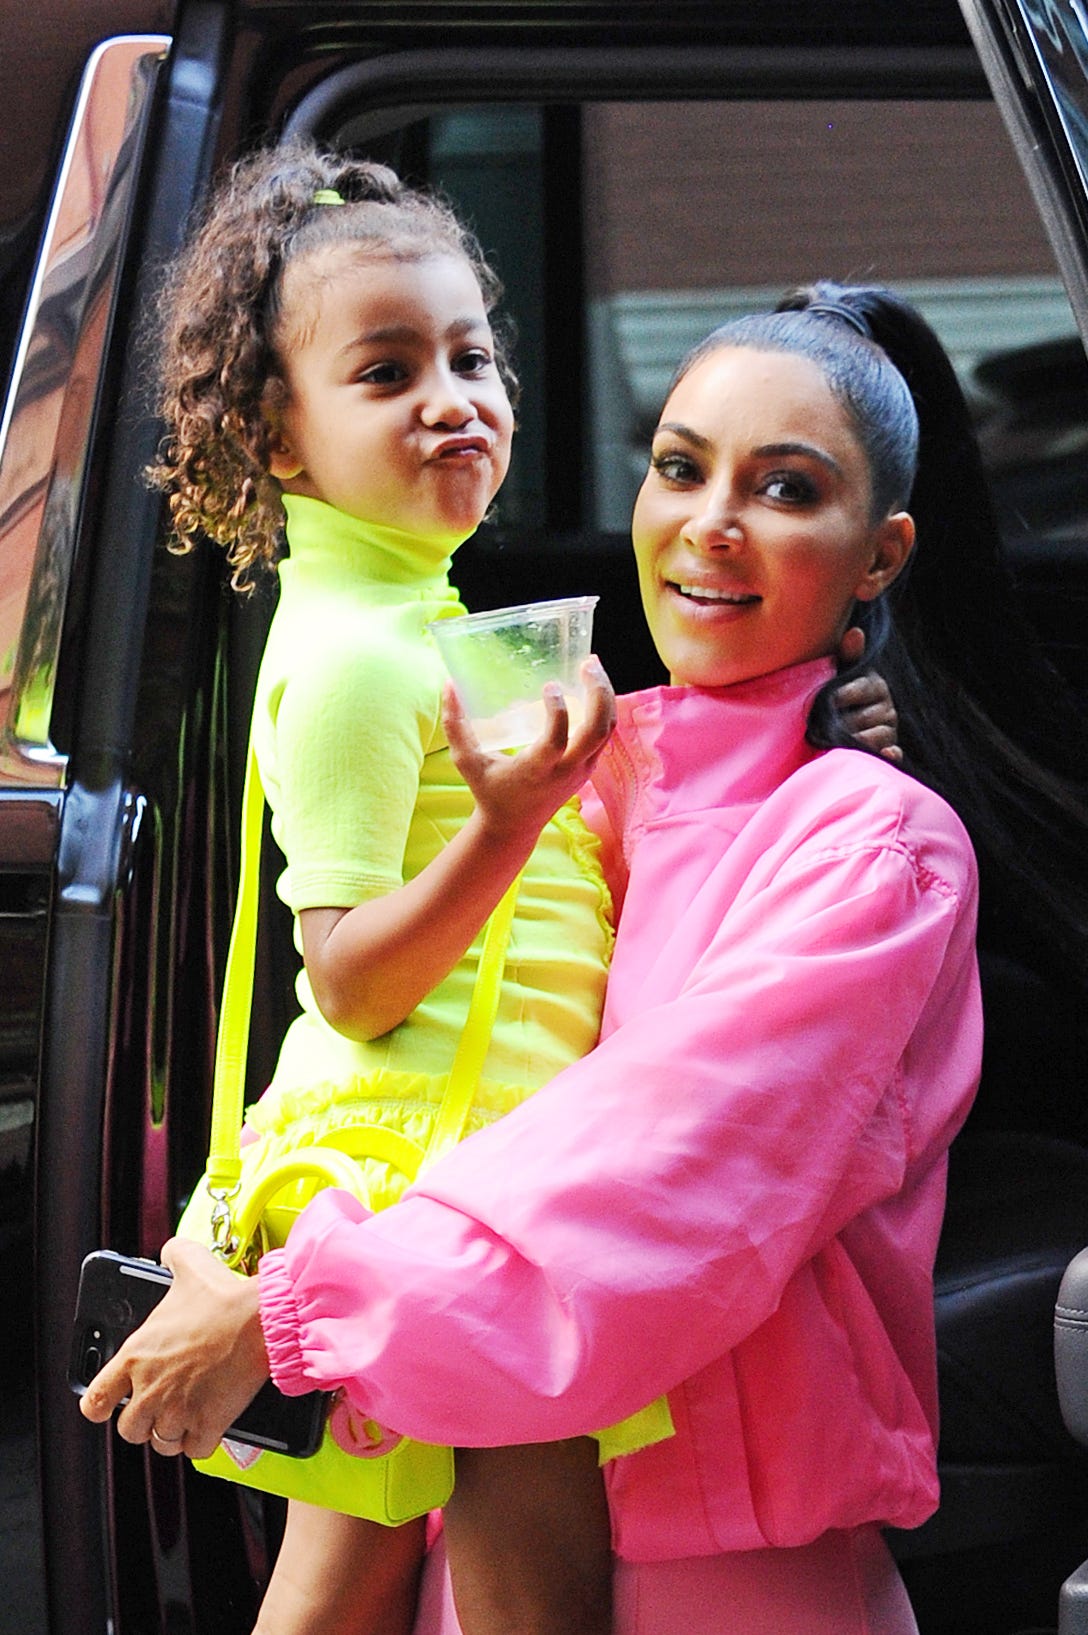 Kim Kardashian's four-year-old daughter North West steps out with